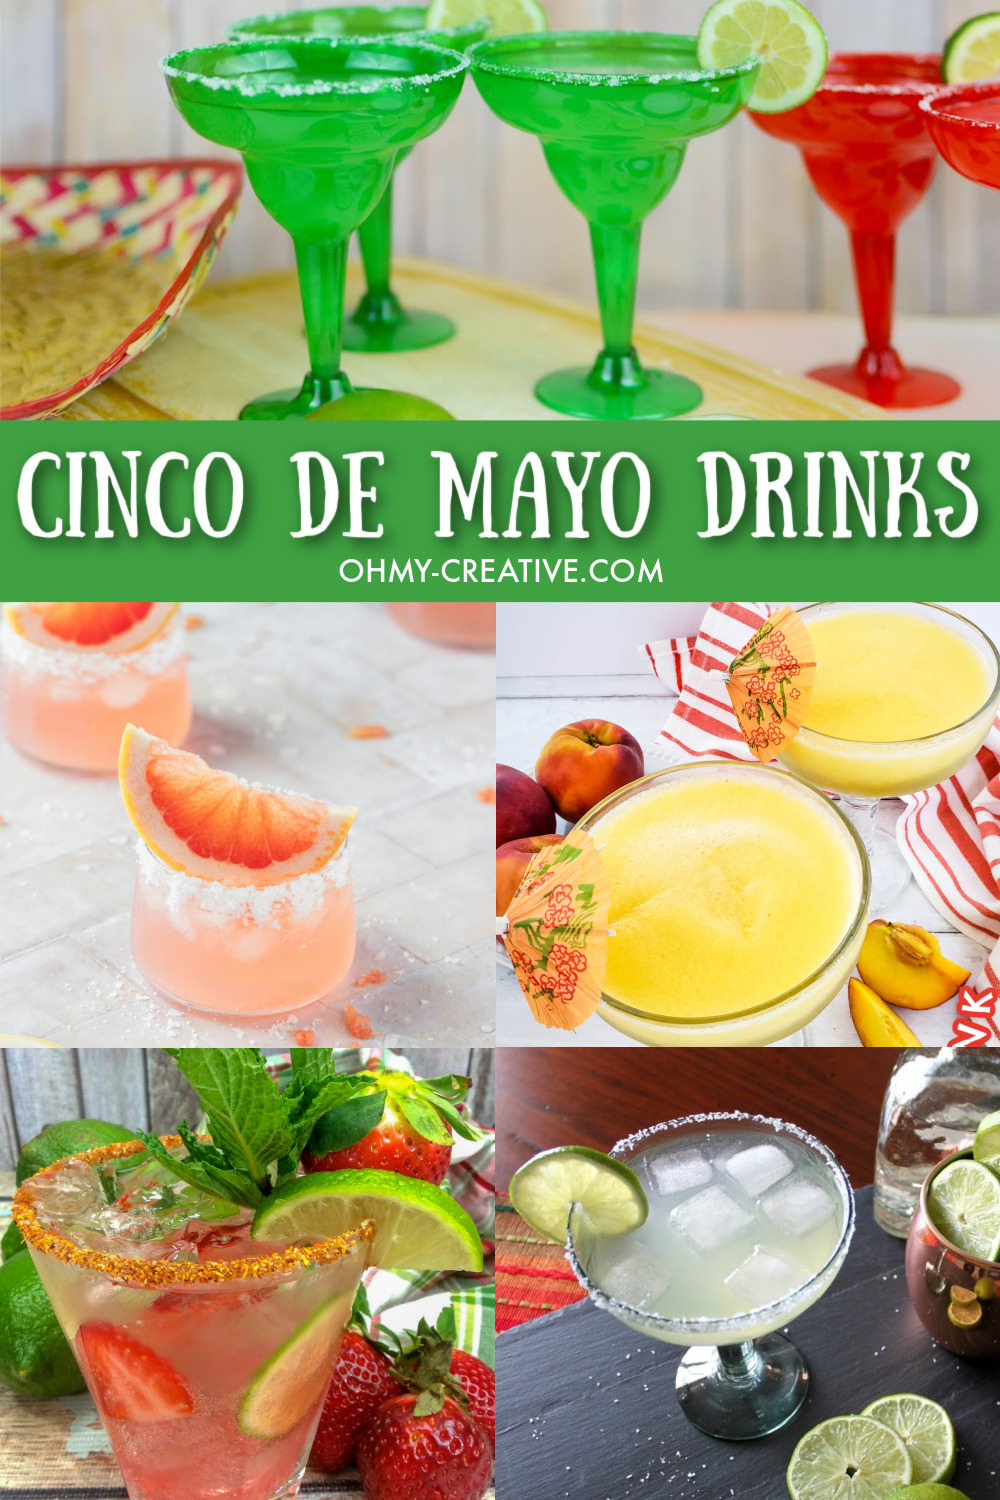 A collage of Cinco de Mayo drinks and cocktails including different margarita recipes.